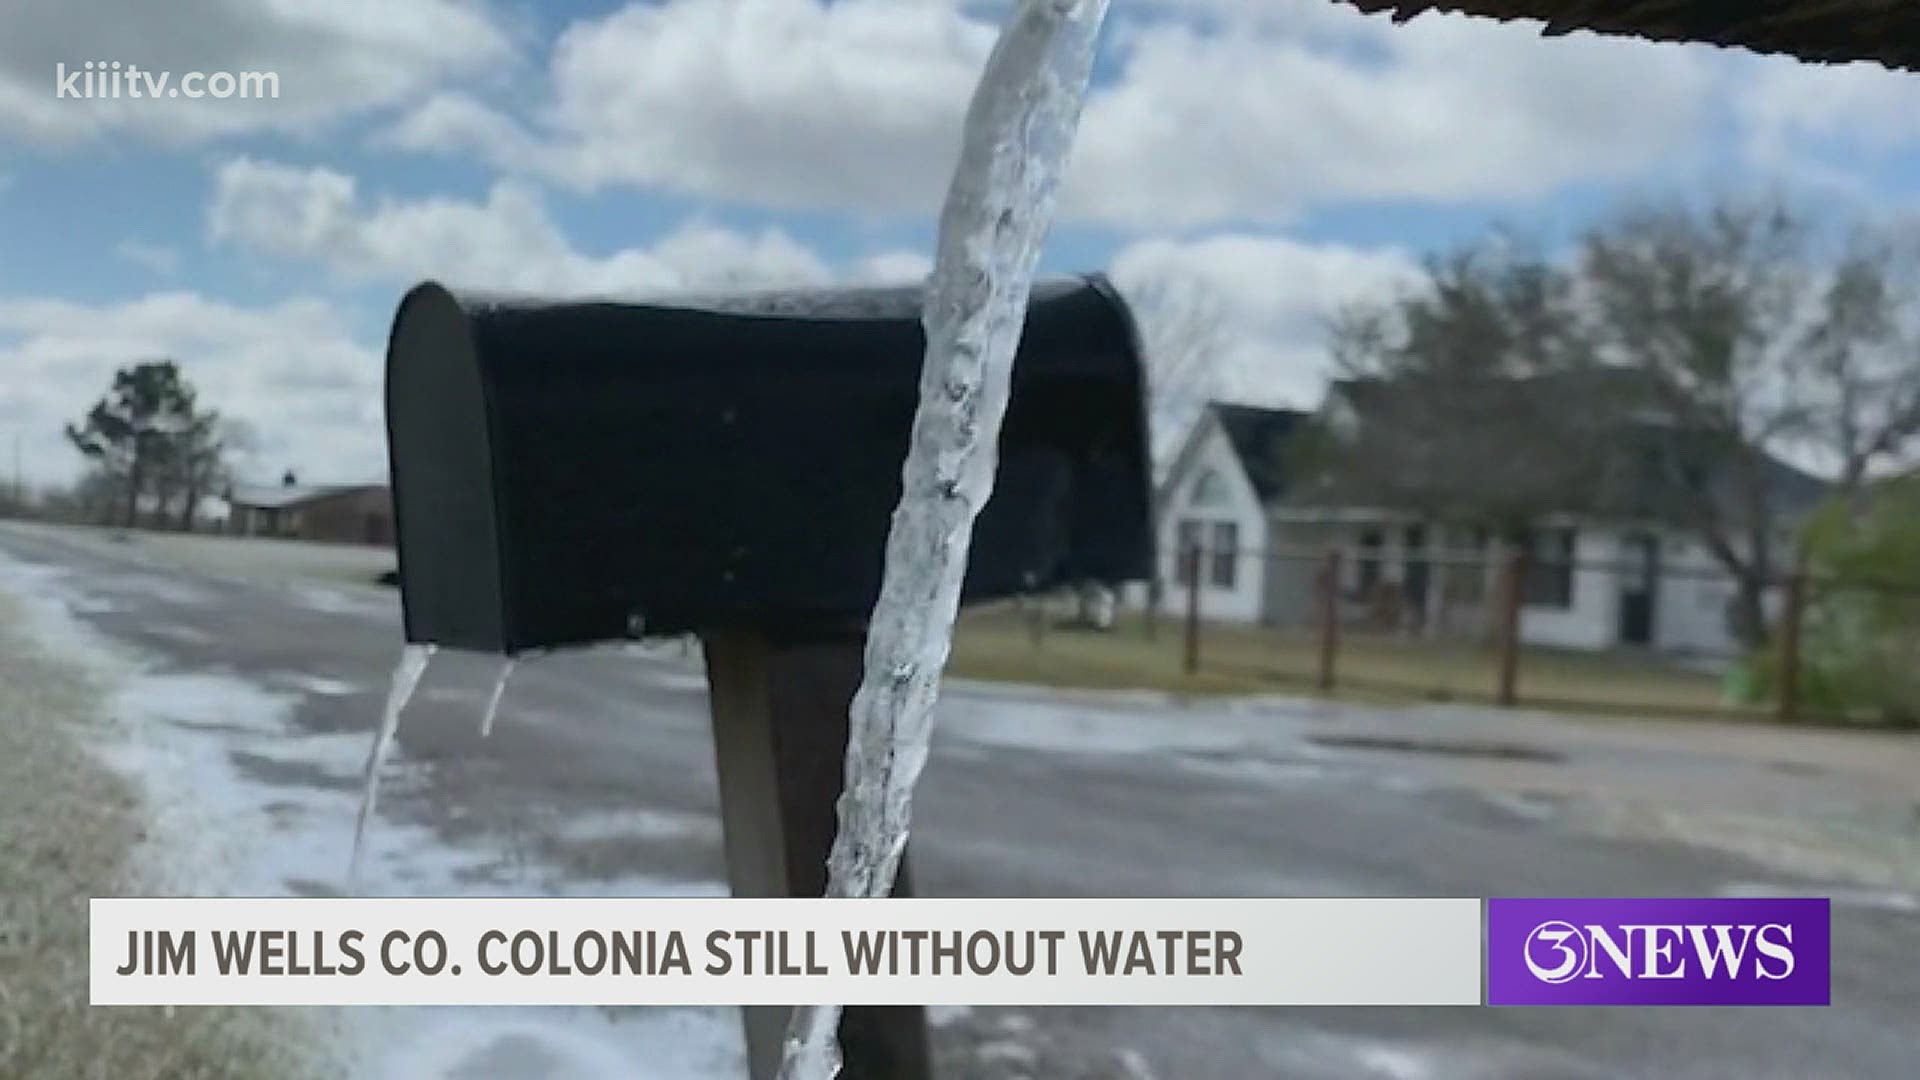 There's an area in Jim Wells County where 700 to 800 families, who live outside city limits, have no water because of frozen pipes and damaged water wells.